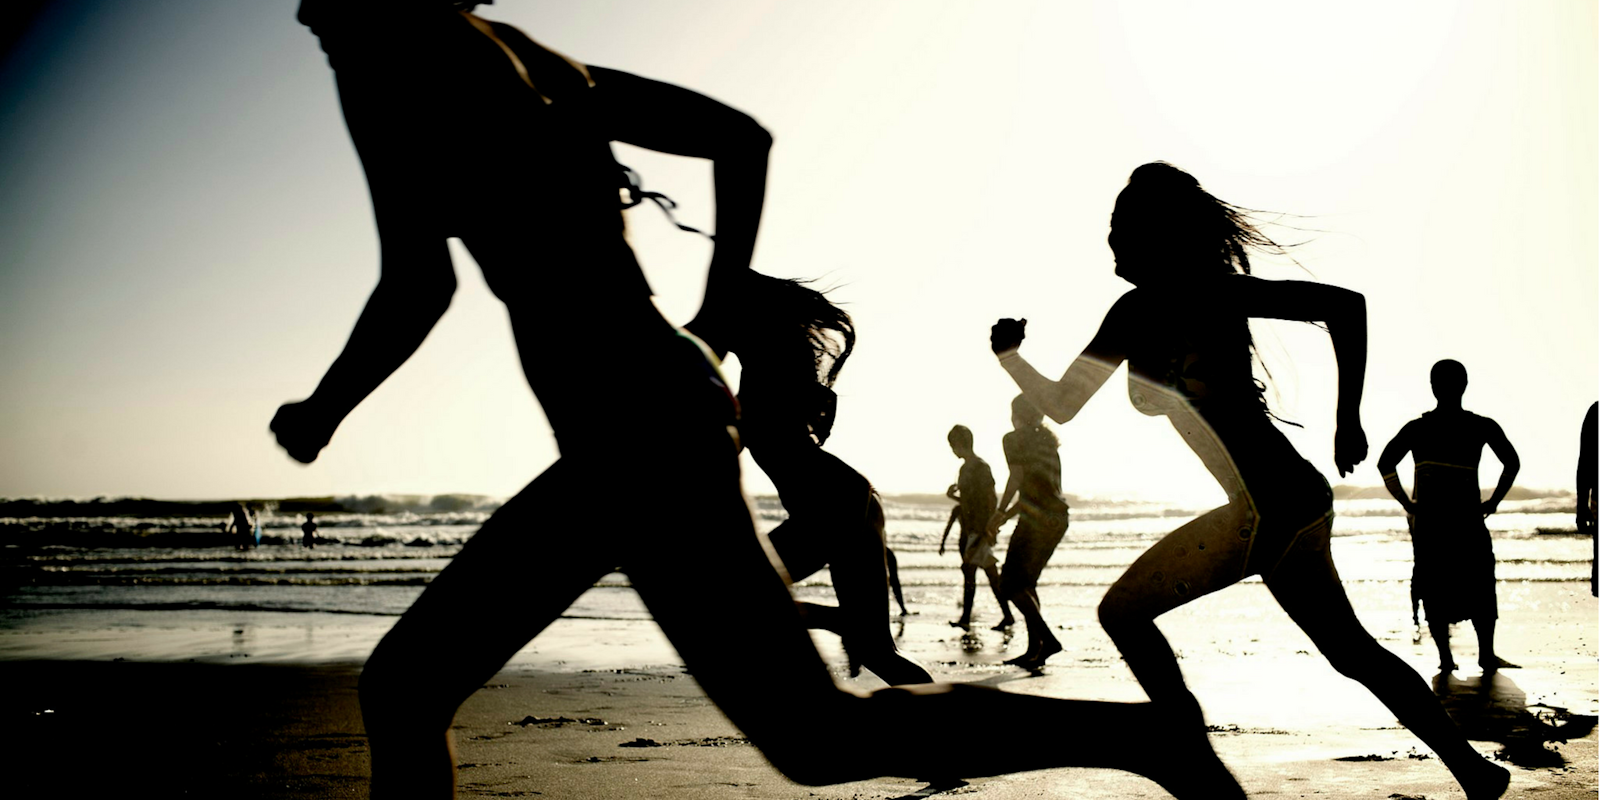 Silhouettes of girls running on a beach